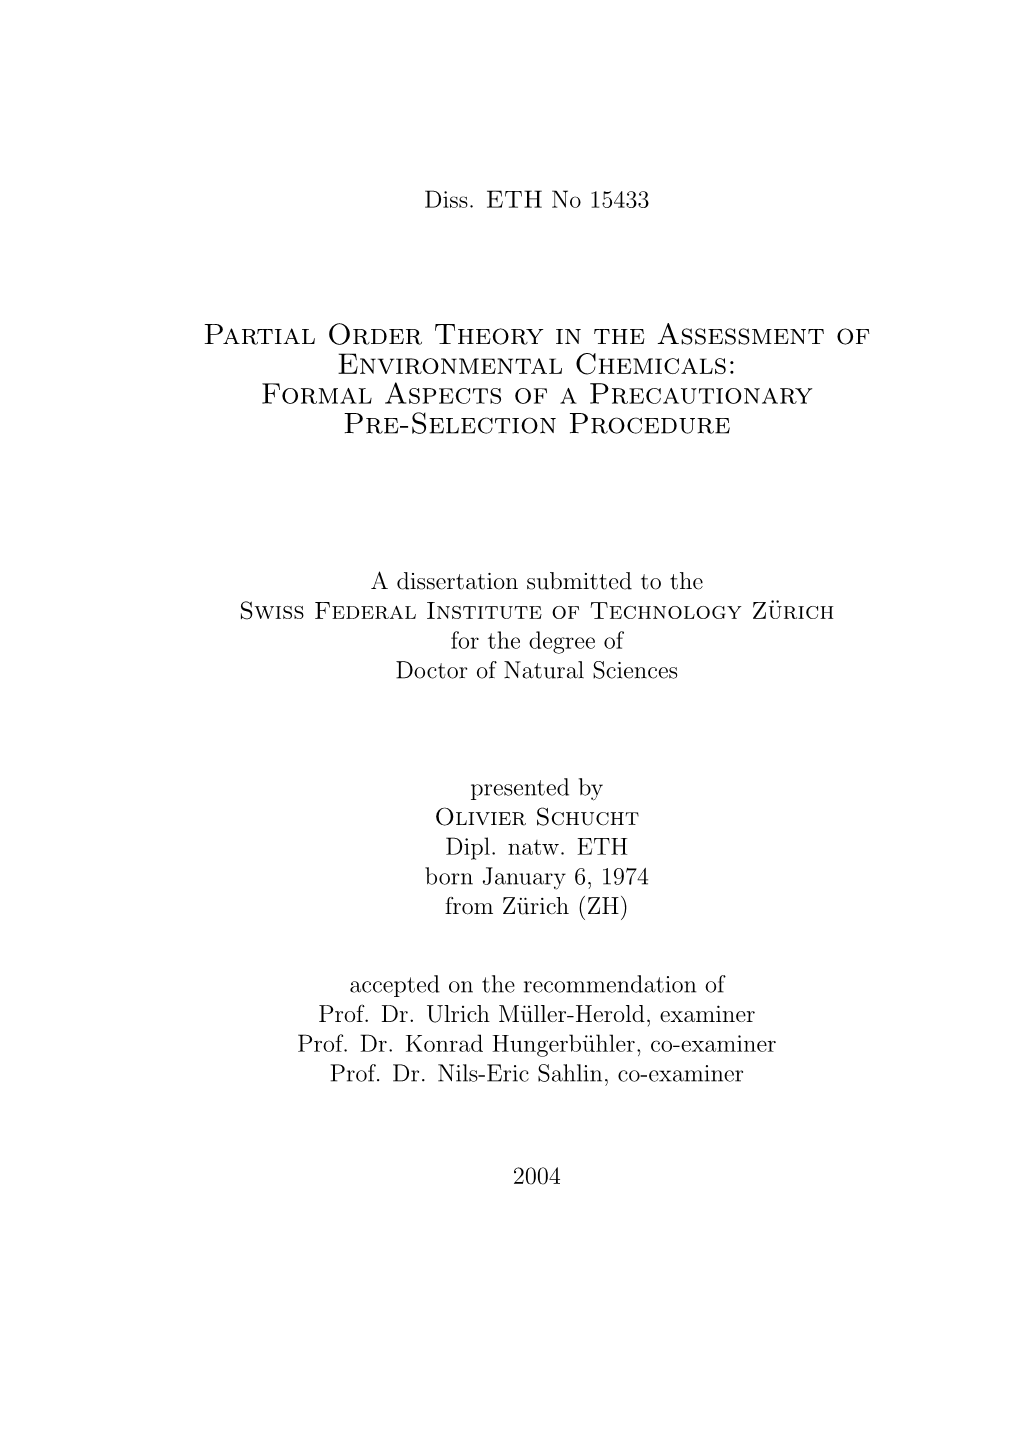 Partial Order Theory in the Assessment of Environmental Chemicals: Formal Aspects of a Precautionary Pre-Selection Procedure